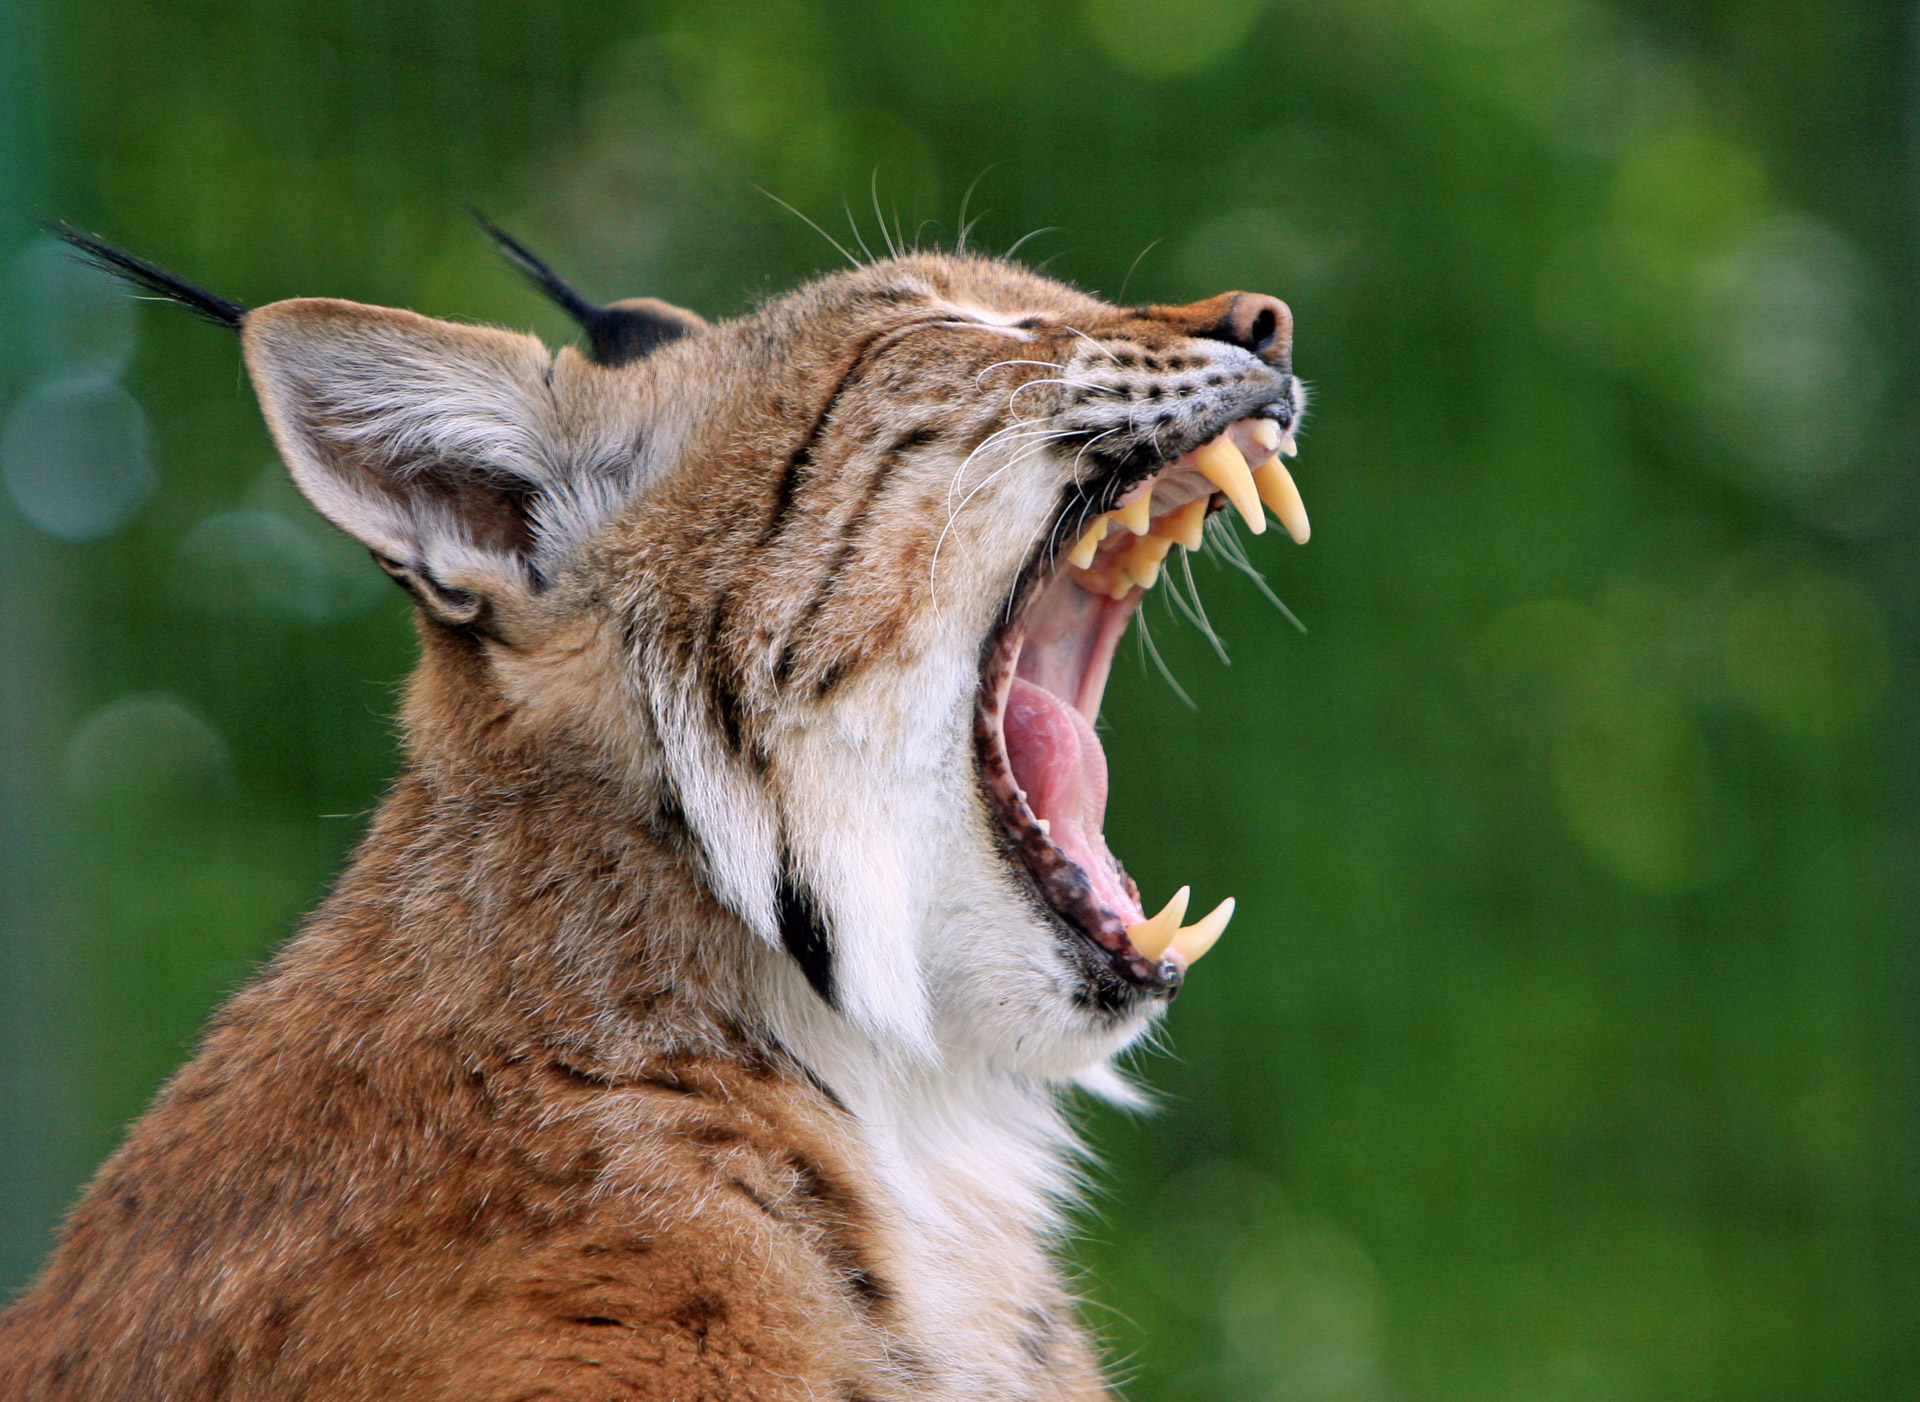 Close-up portrait of a bobcat or lynx yawning with mouth wide open showing teeth